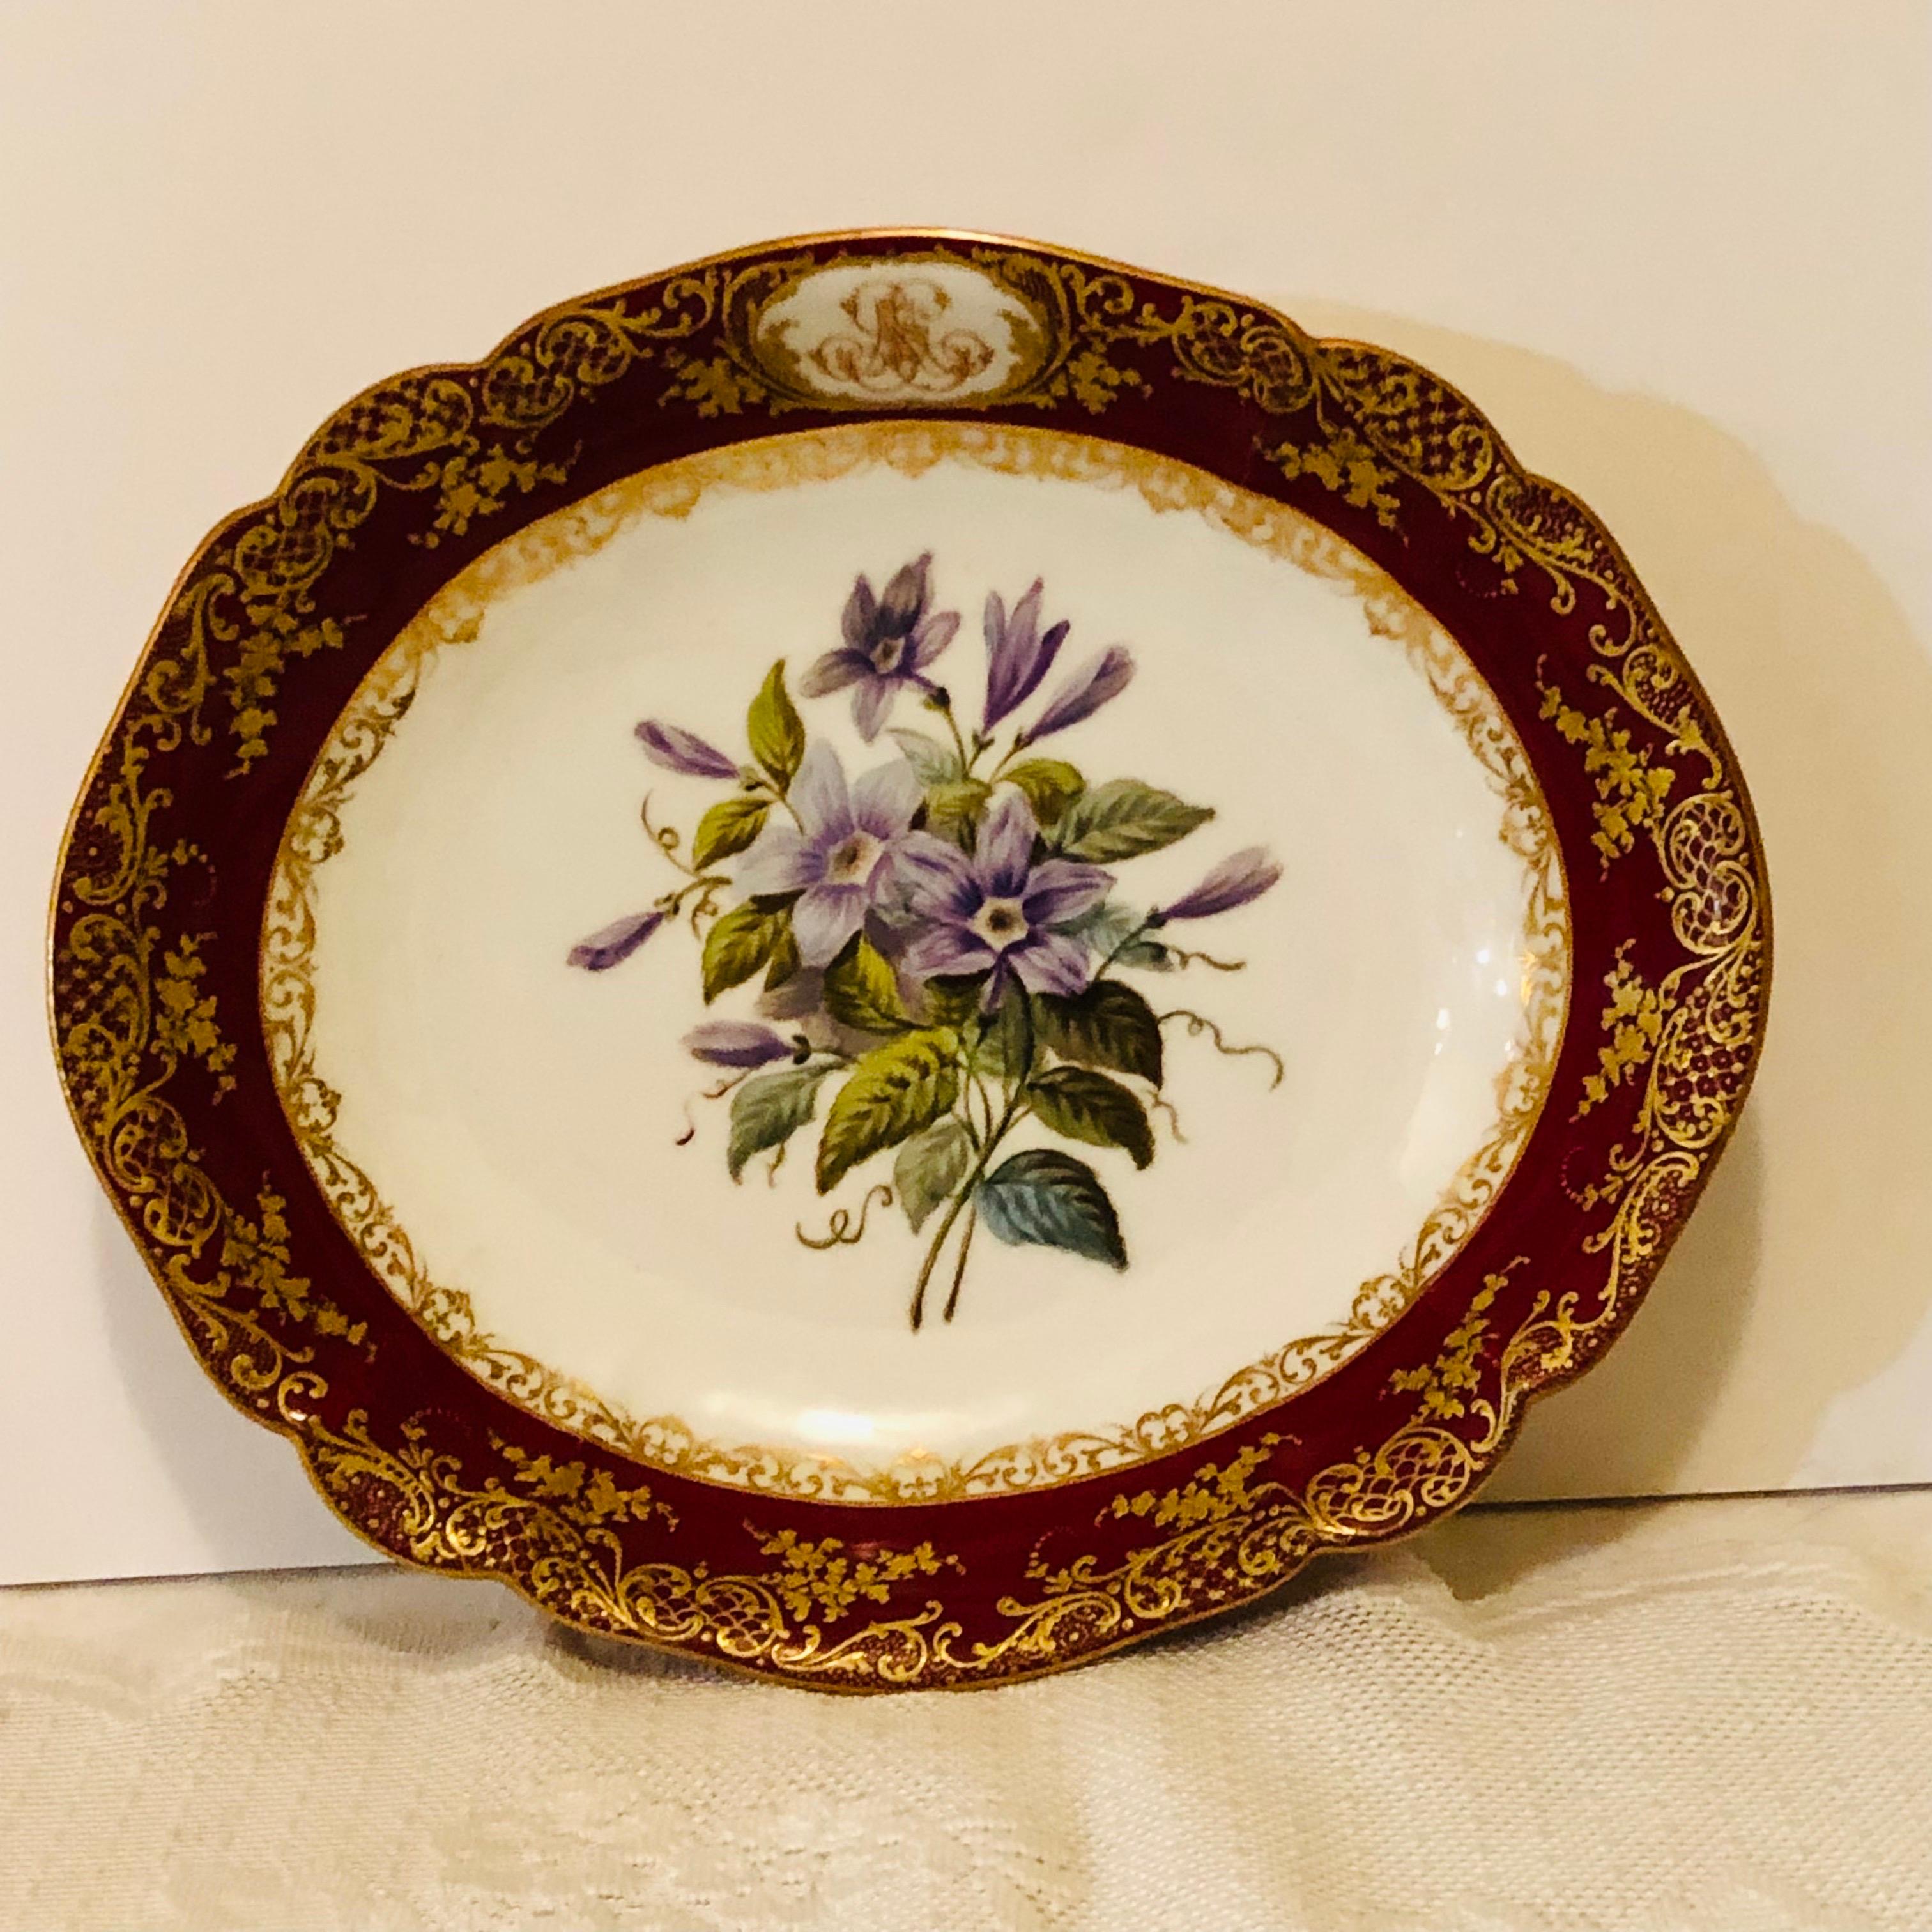 Look at the museum quality painting of clematis on this Old Paris Porcelain bowl painted by the studio of Boyer Rue De La Paix. This bowl was made in the mid 19th century. The central painting of clematis is surrounded by a maroon, red fluted border